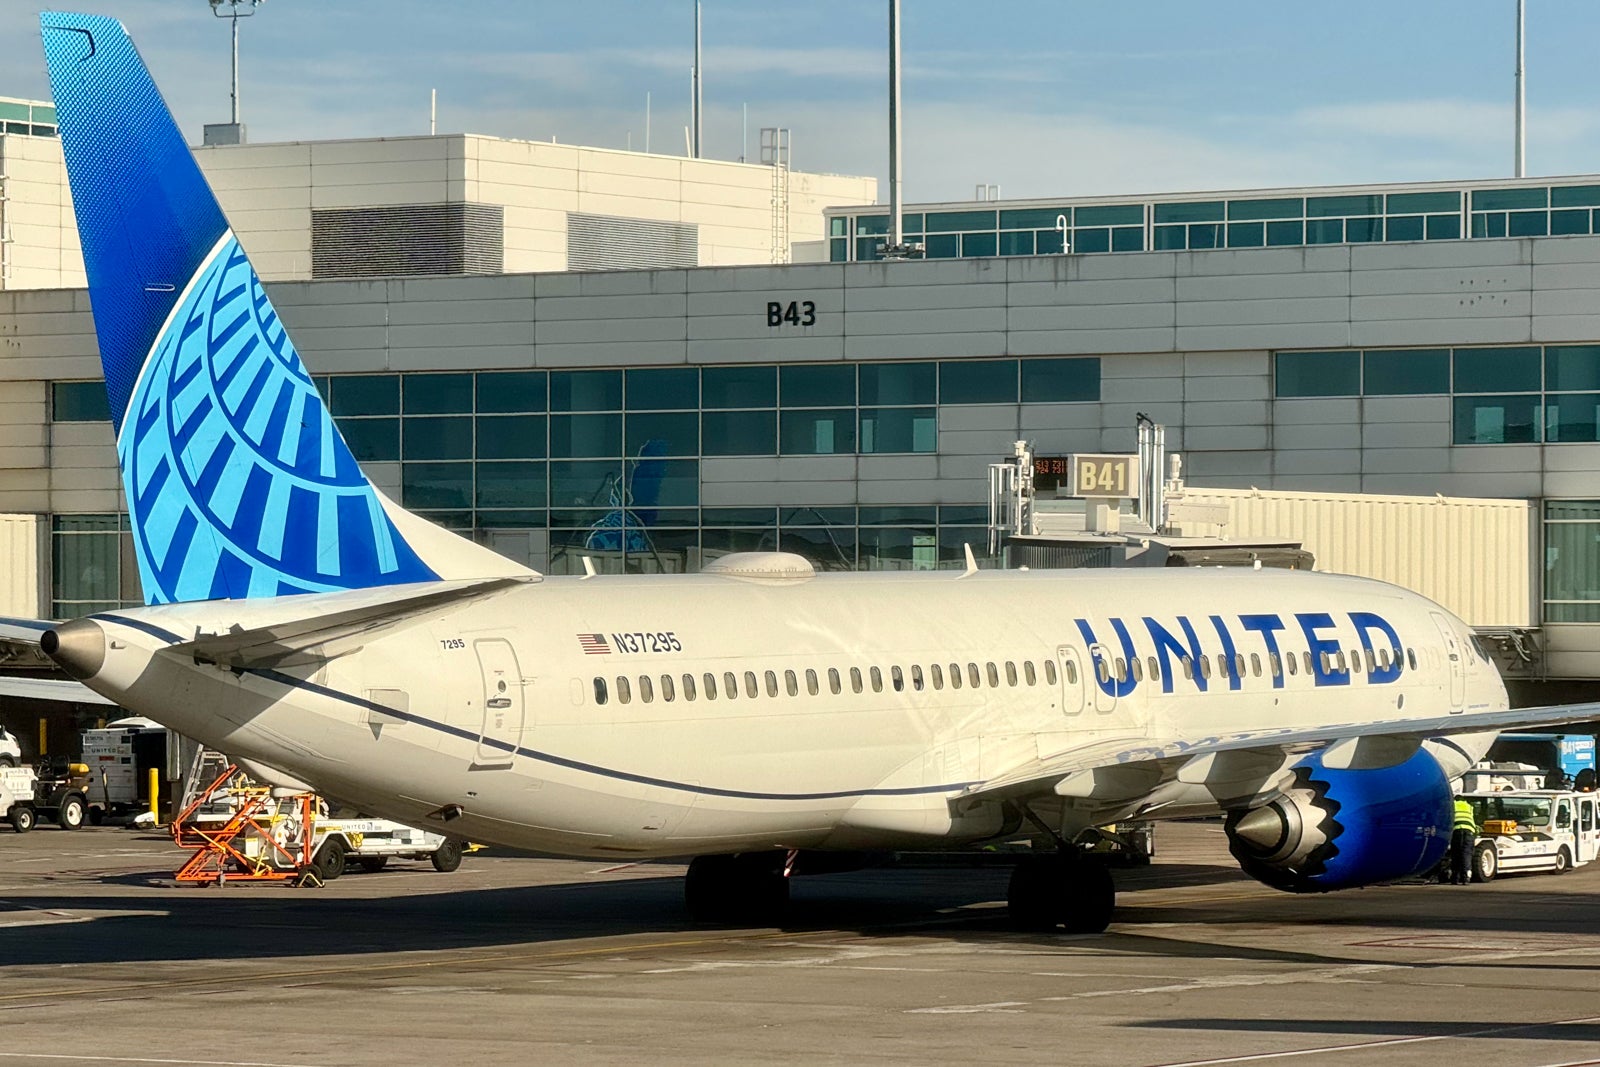 A United Boeing parked at an airport gate